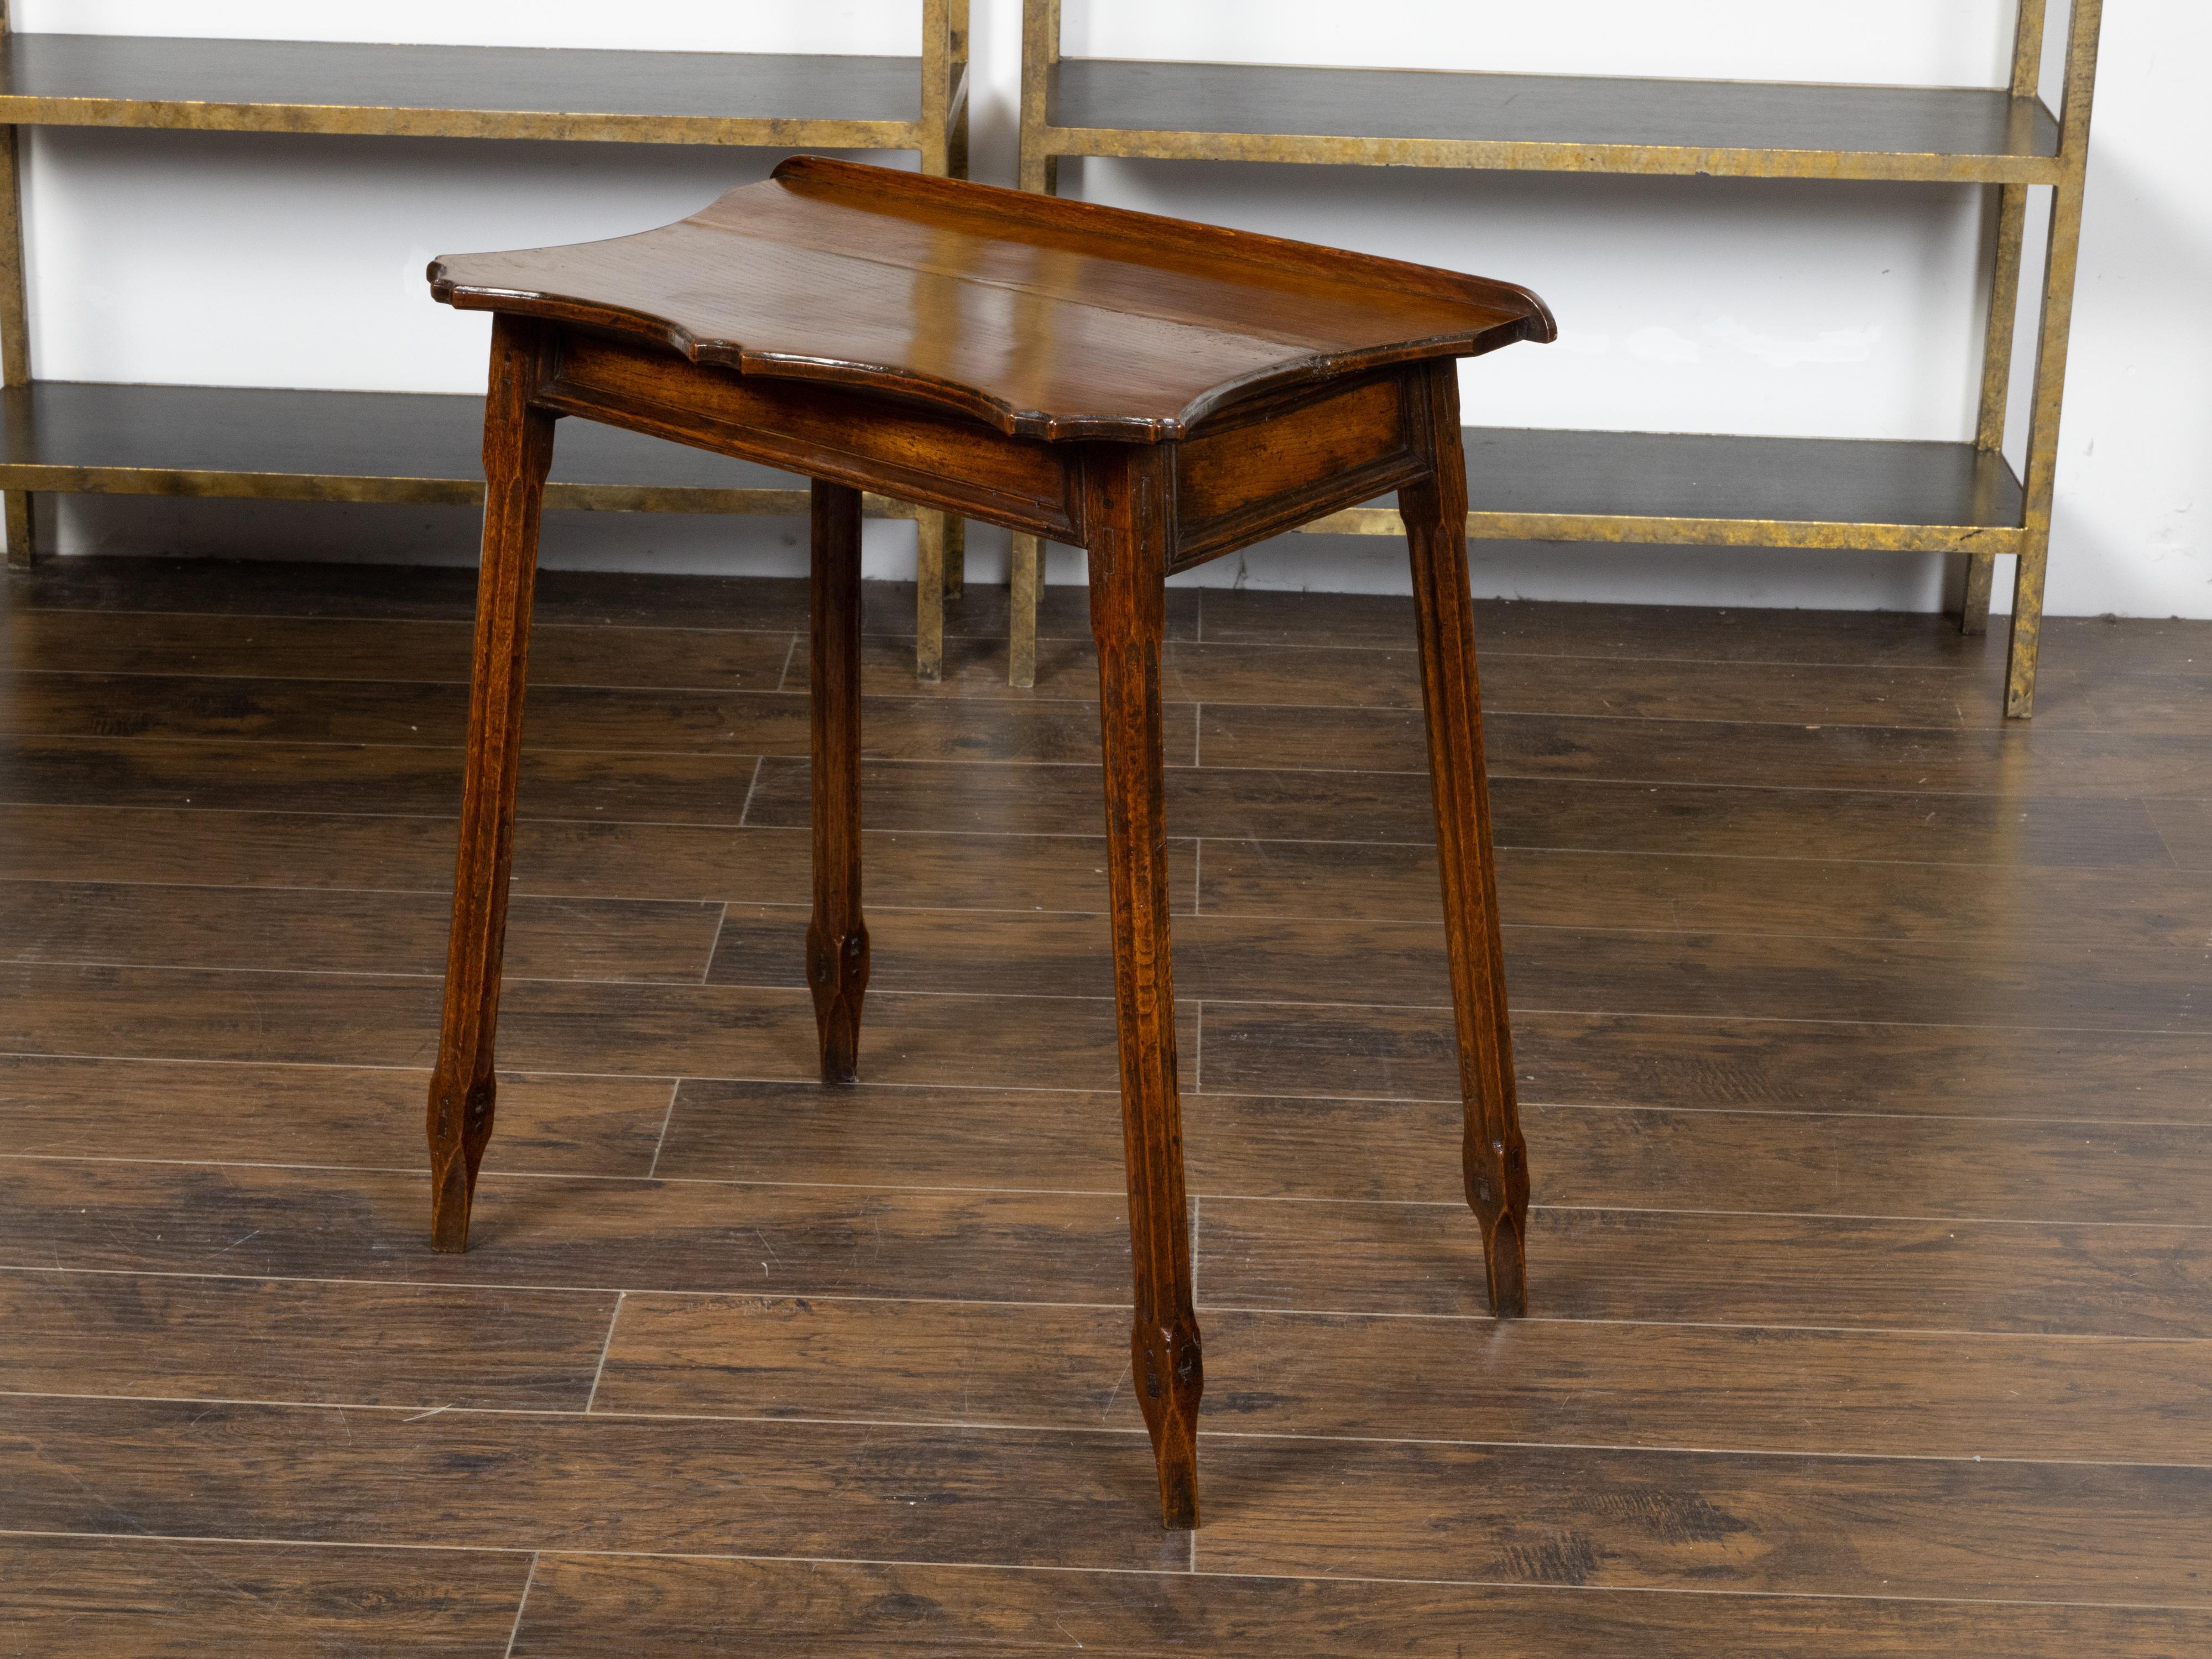 19th Century English Oak Side Table with Lift Top, Carved Serpentine Front and Fluted Legs For Sale